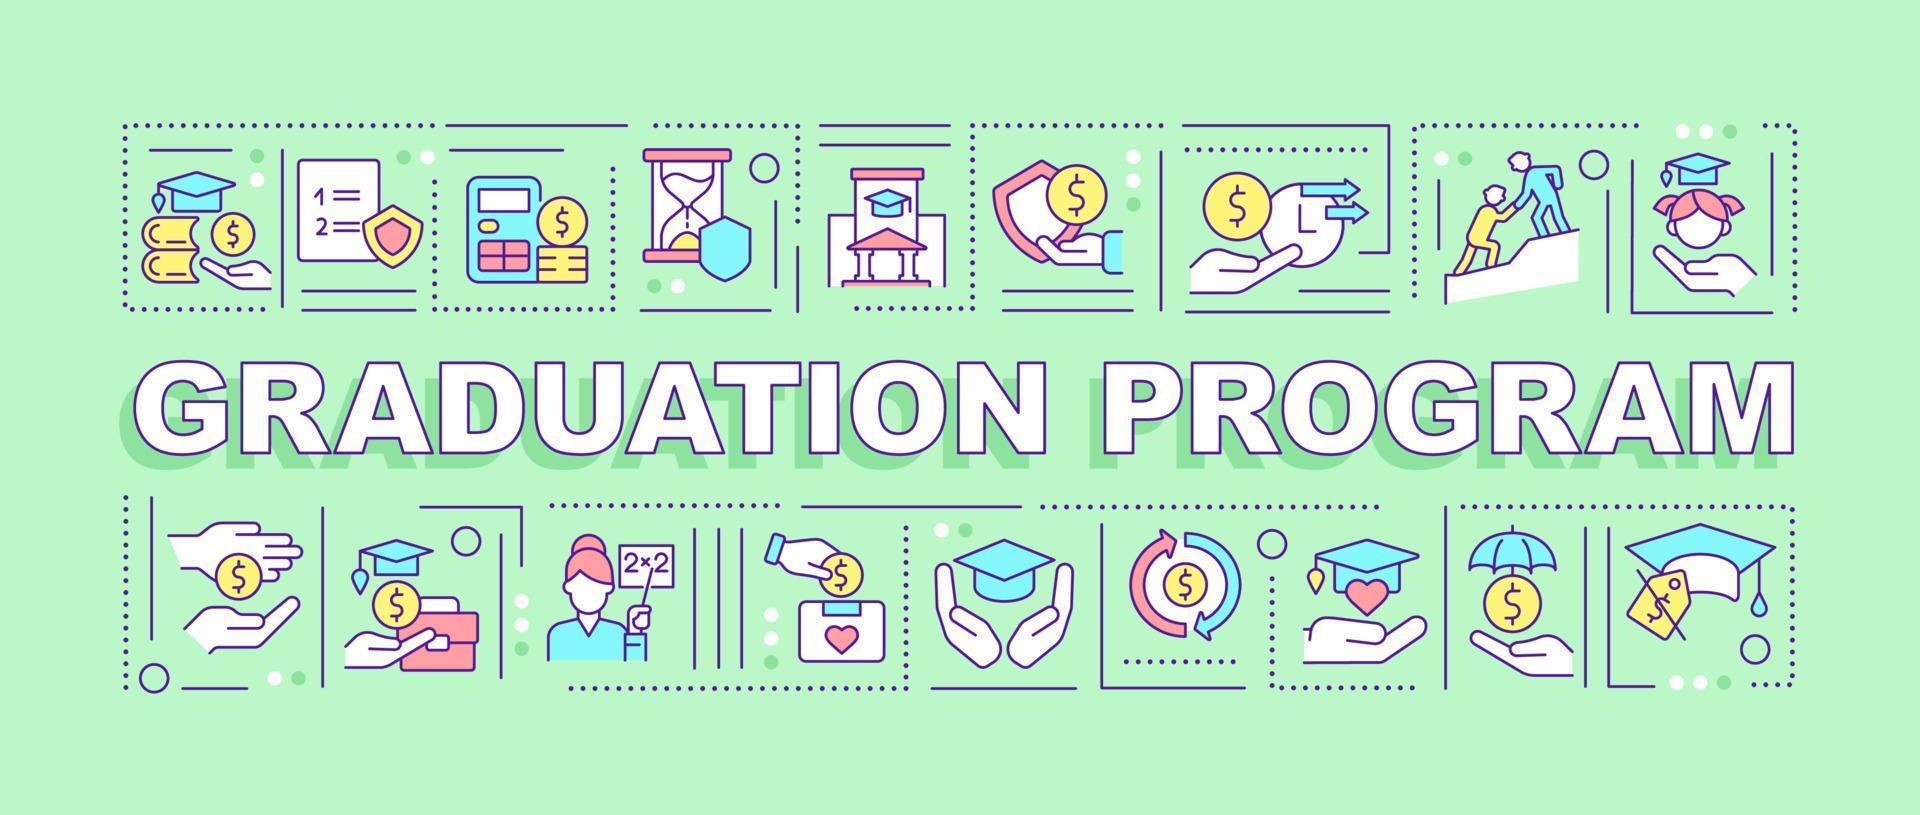 Graduation program word concepts green banner. Social assistance. Infographics with icons on color background. Isolated typography. Vector illustration with text.